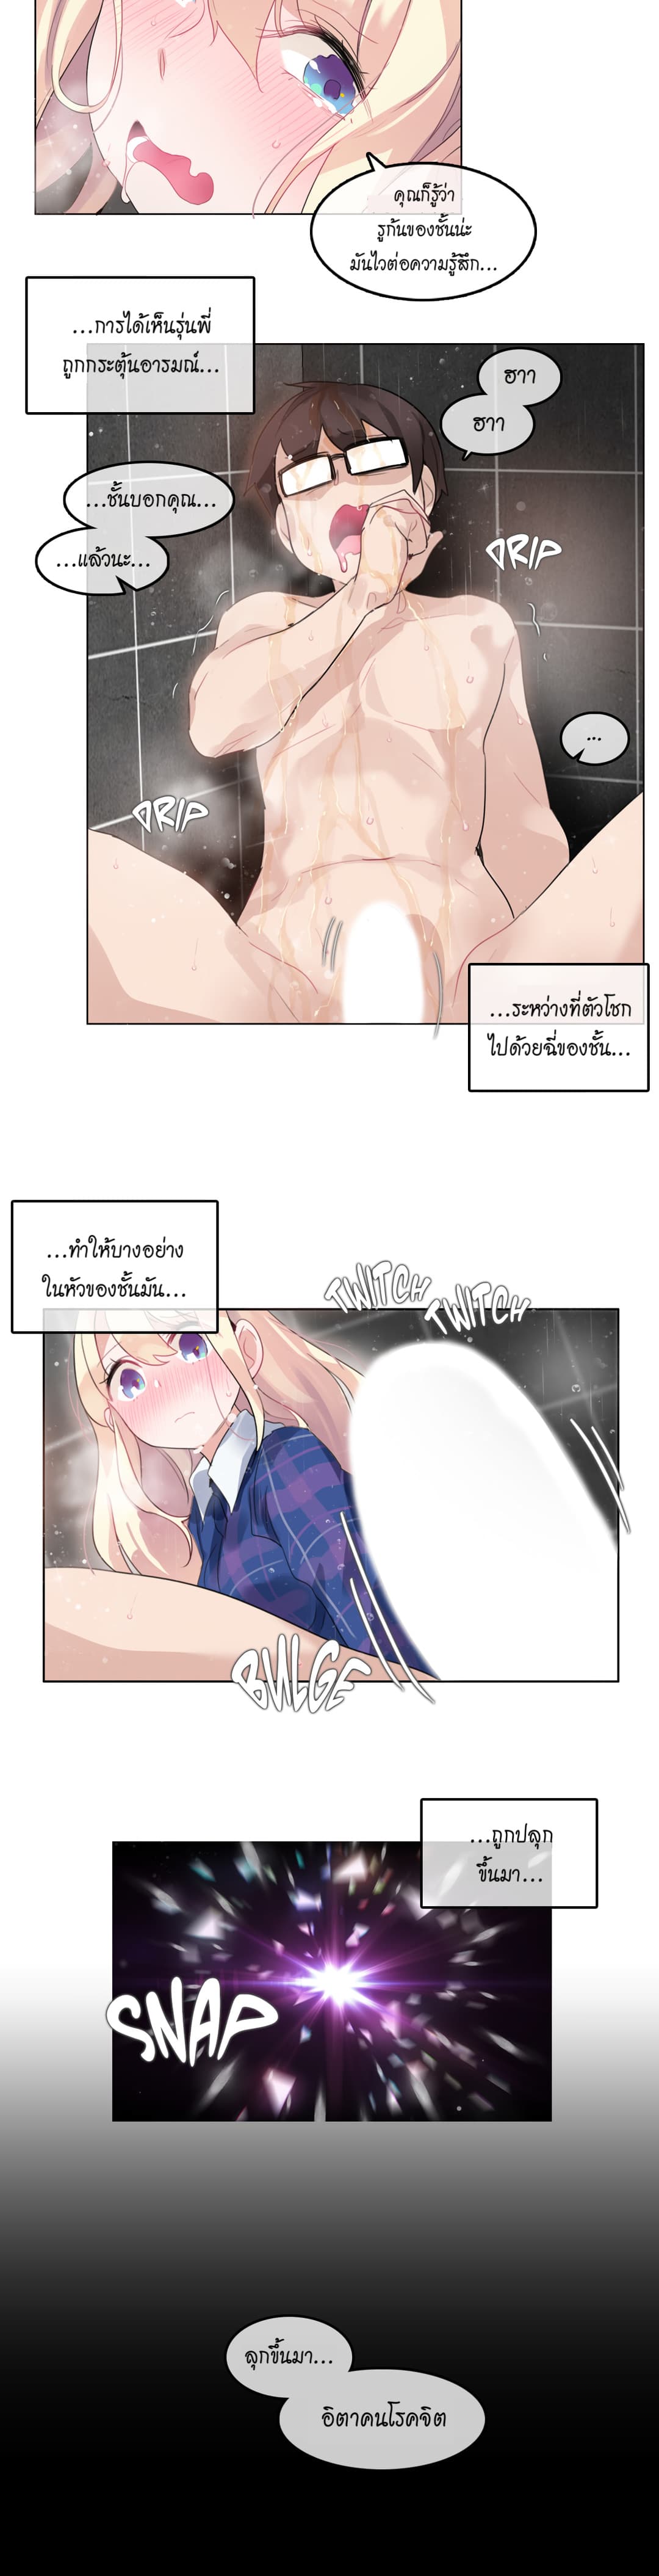 A Pervert’s Daily Life 44 (6)